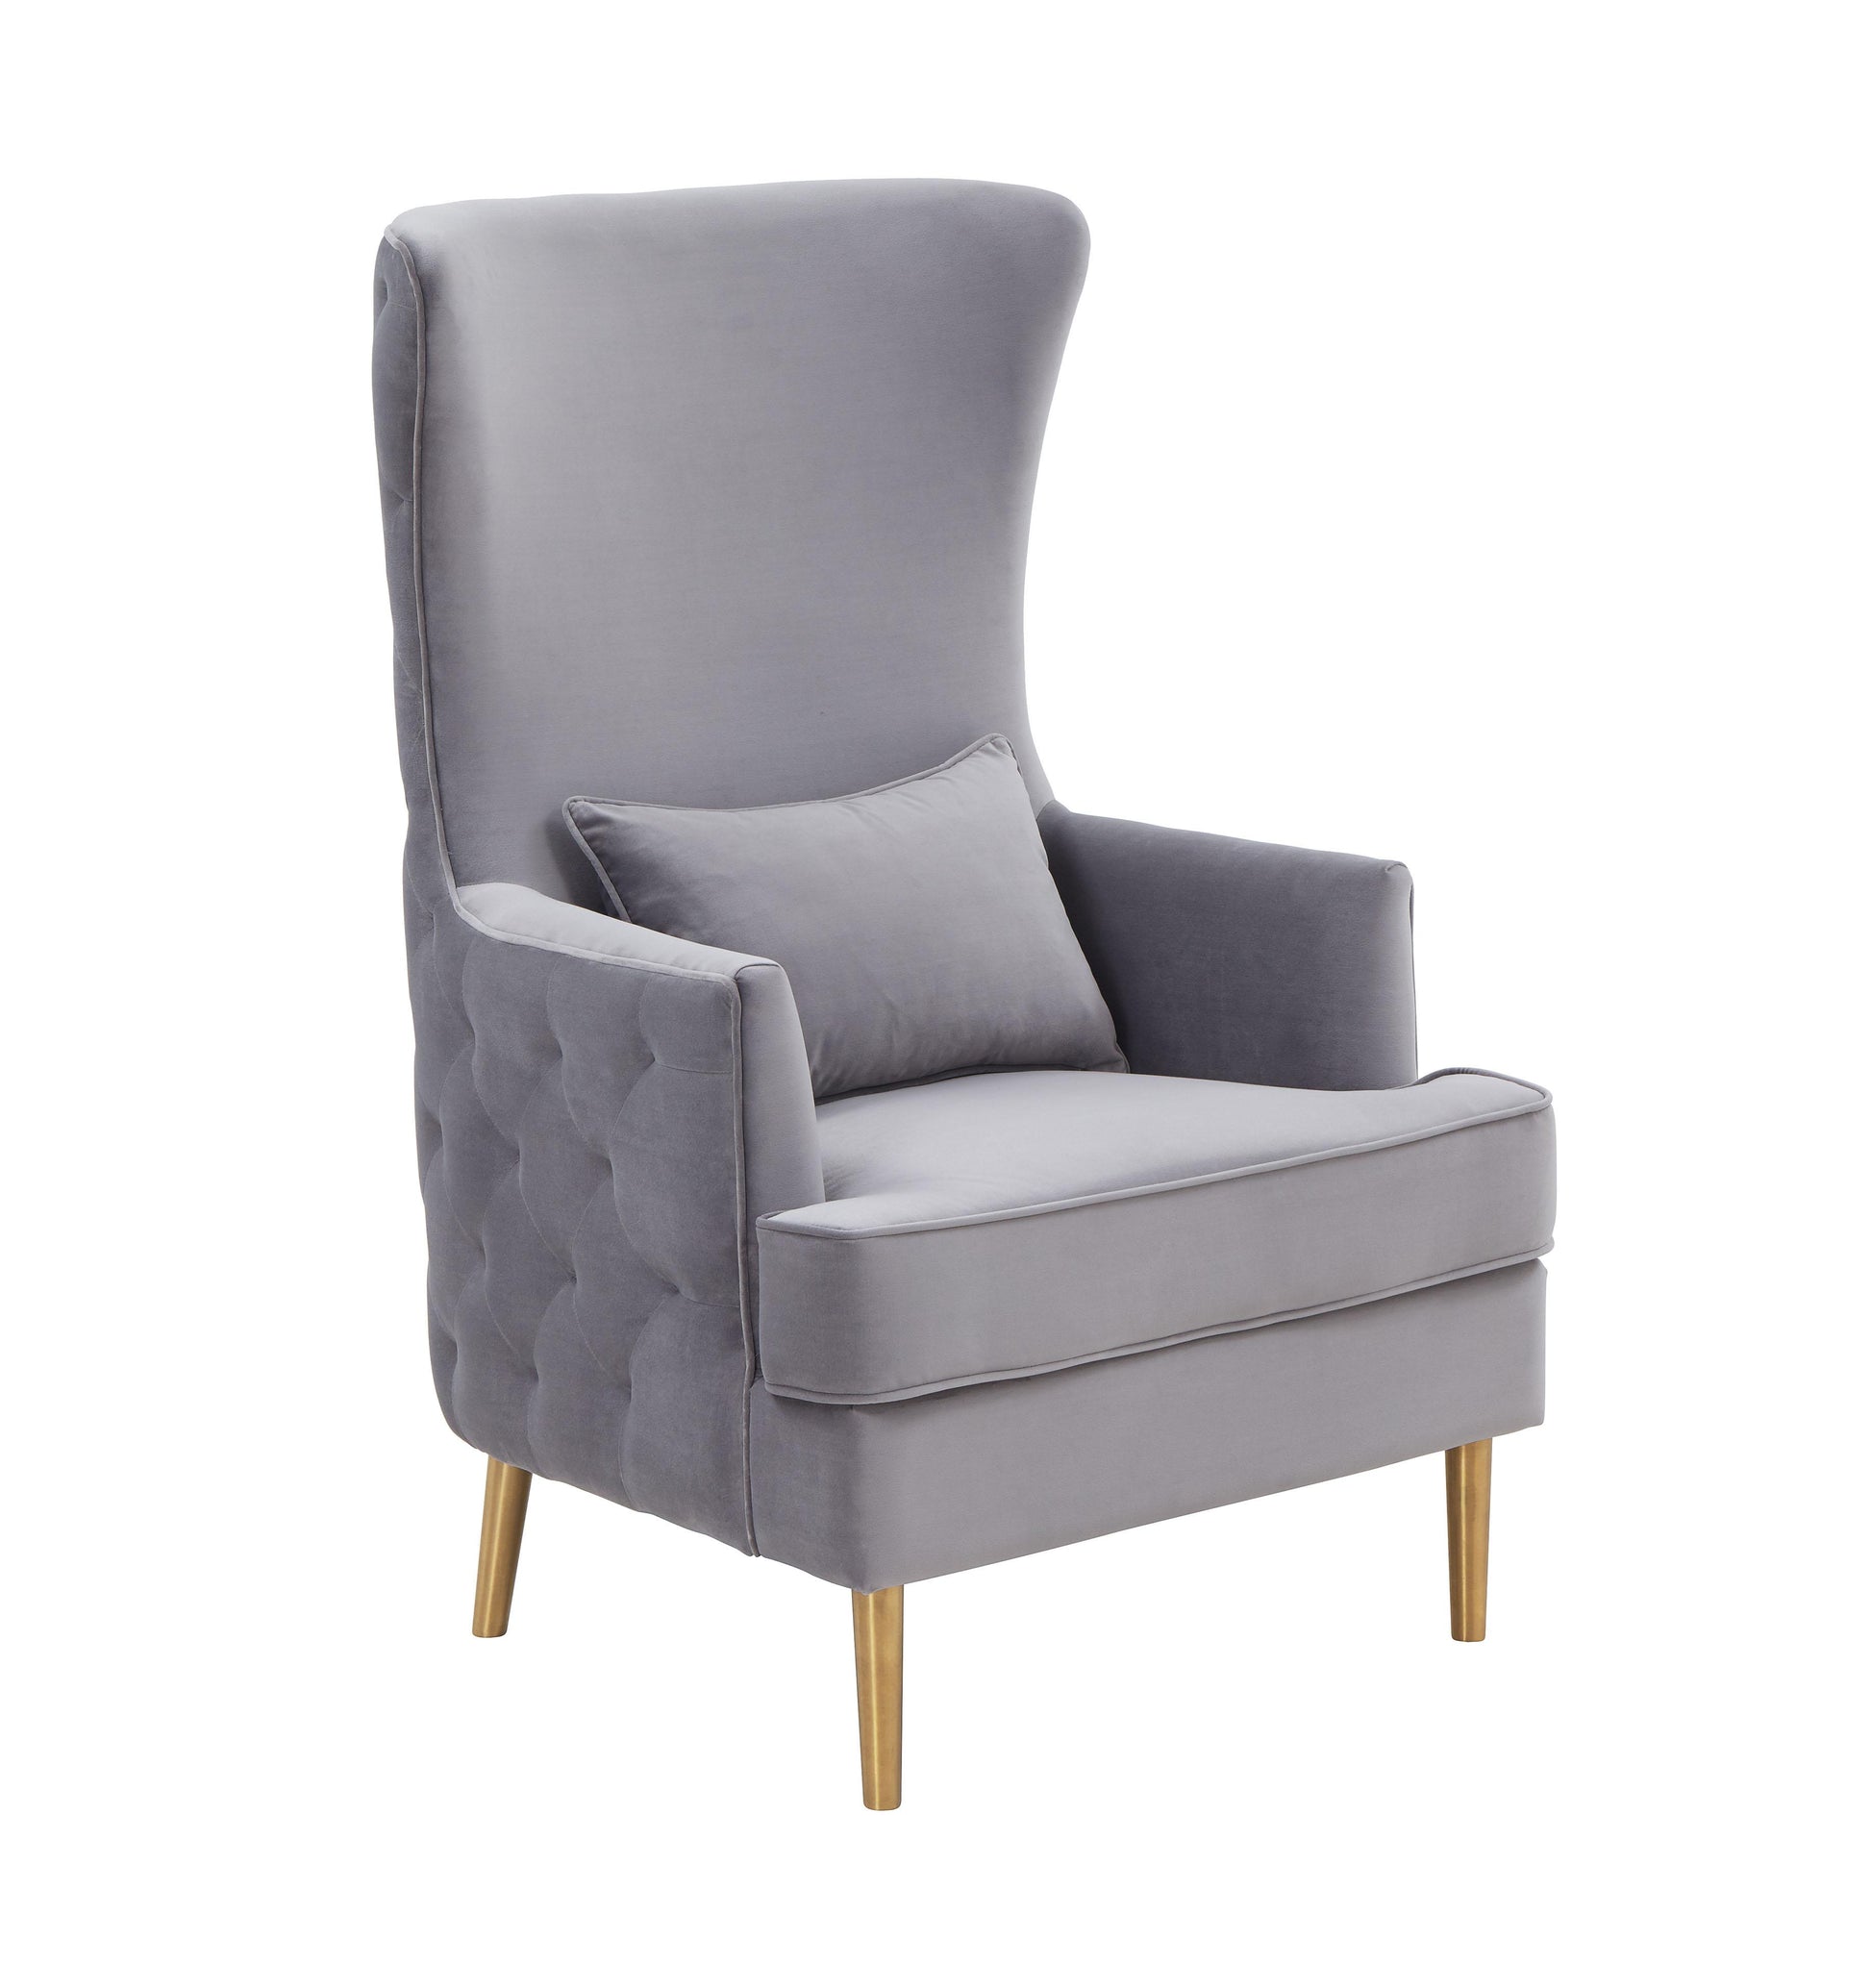 Tov Furniture Alina Grey Tall Tufted Back Chair